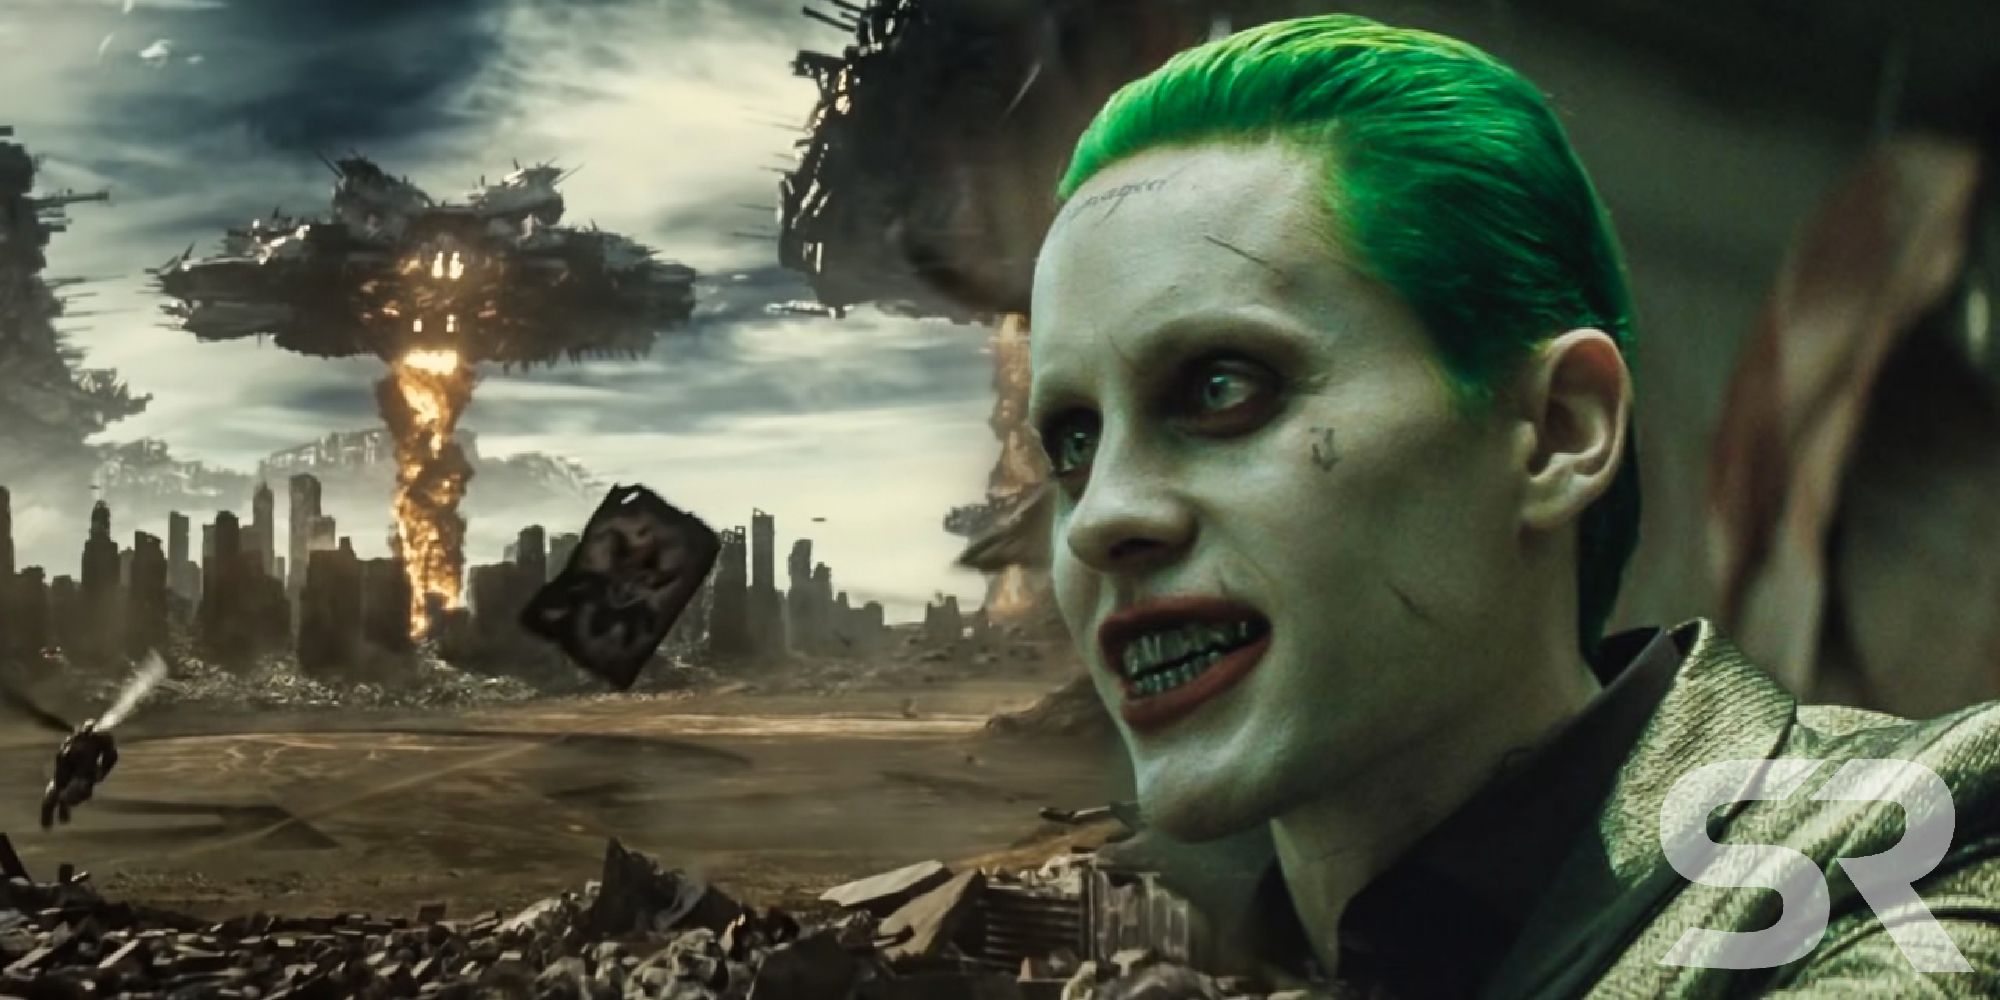 Justice League Snyder Cut’s Joker Knightmare Easter Egg Explained